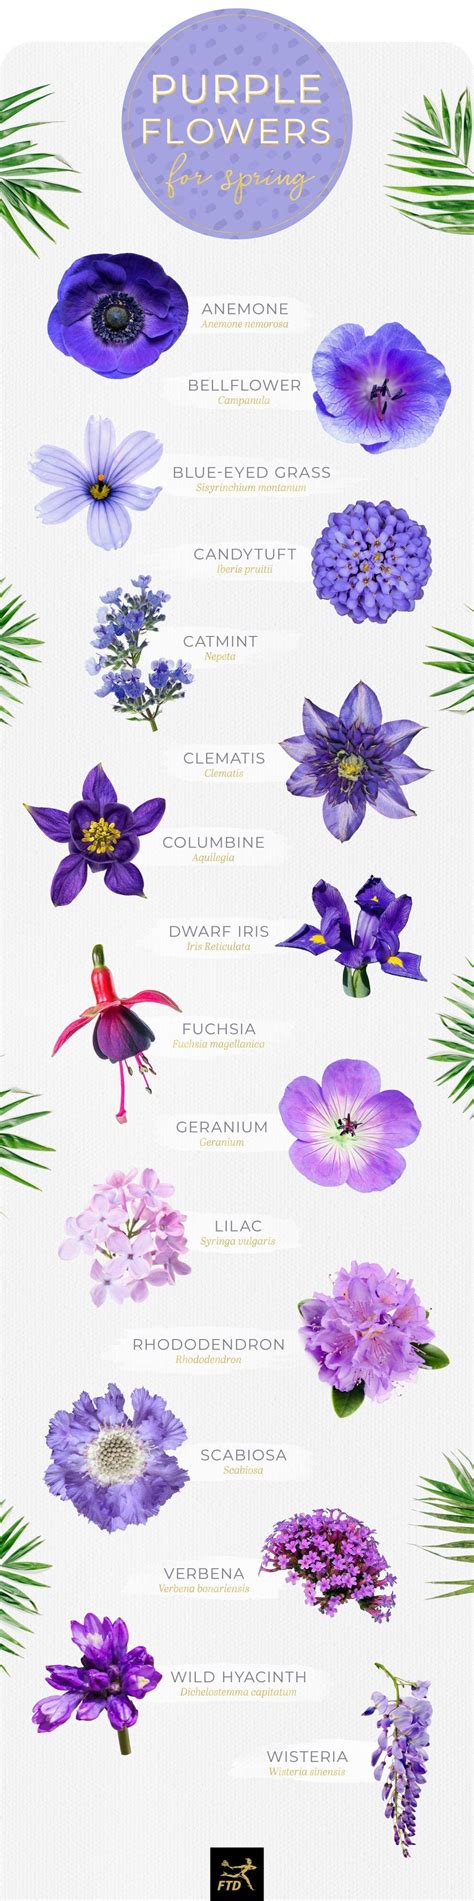 Purple Flowers Images And Names Purple Flower Names Bodenswasuee